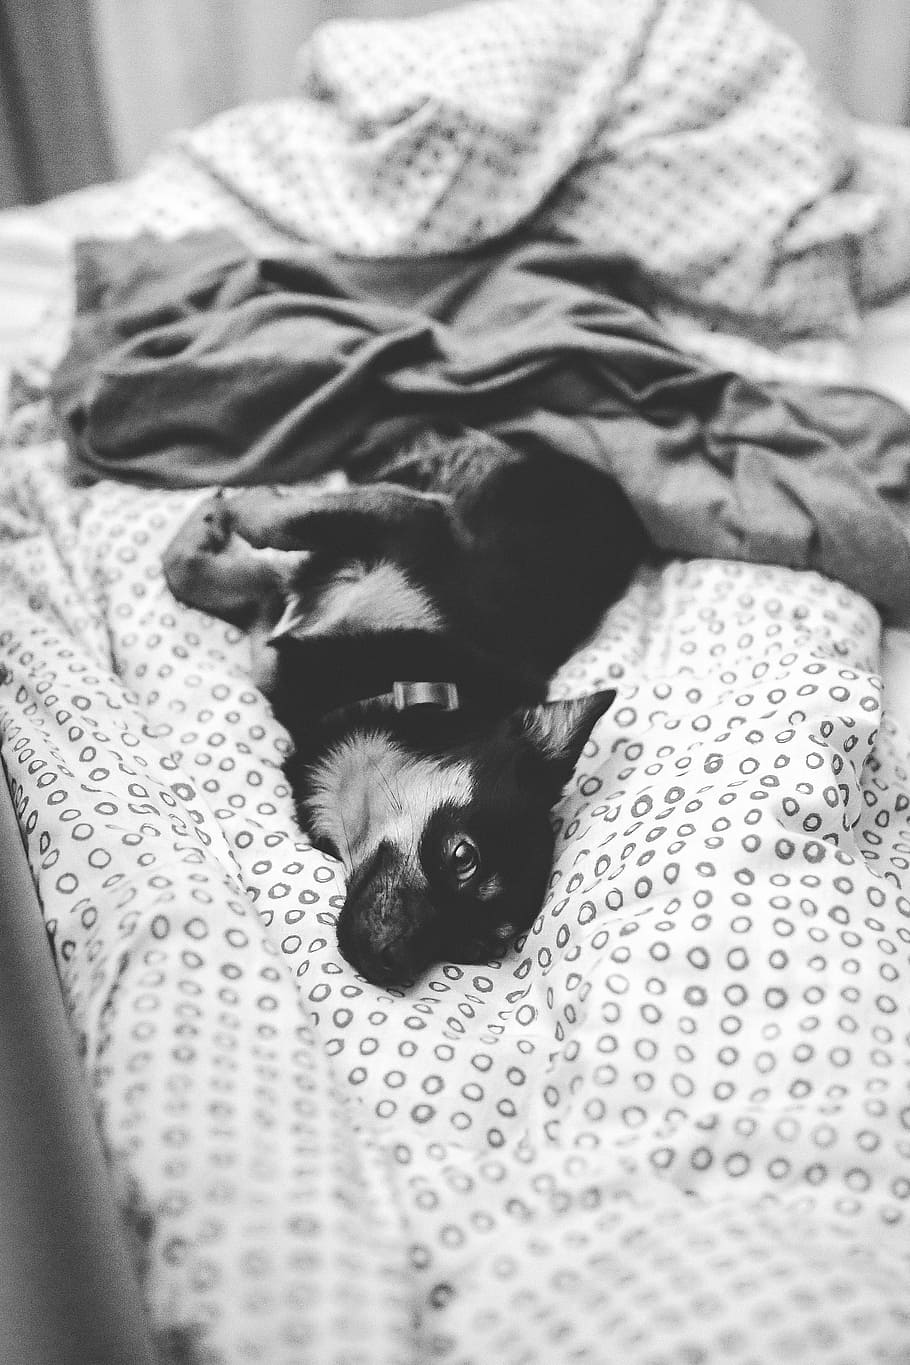 Dog lying on a bed, pet, animal, cute, puppy, blackandwhite, pets